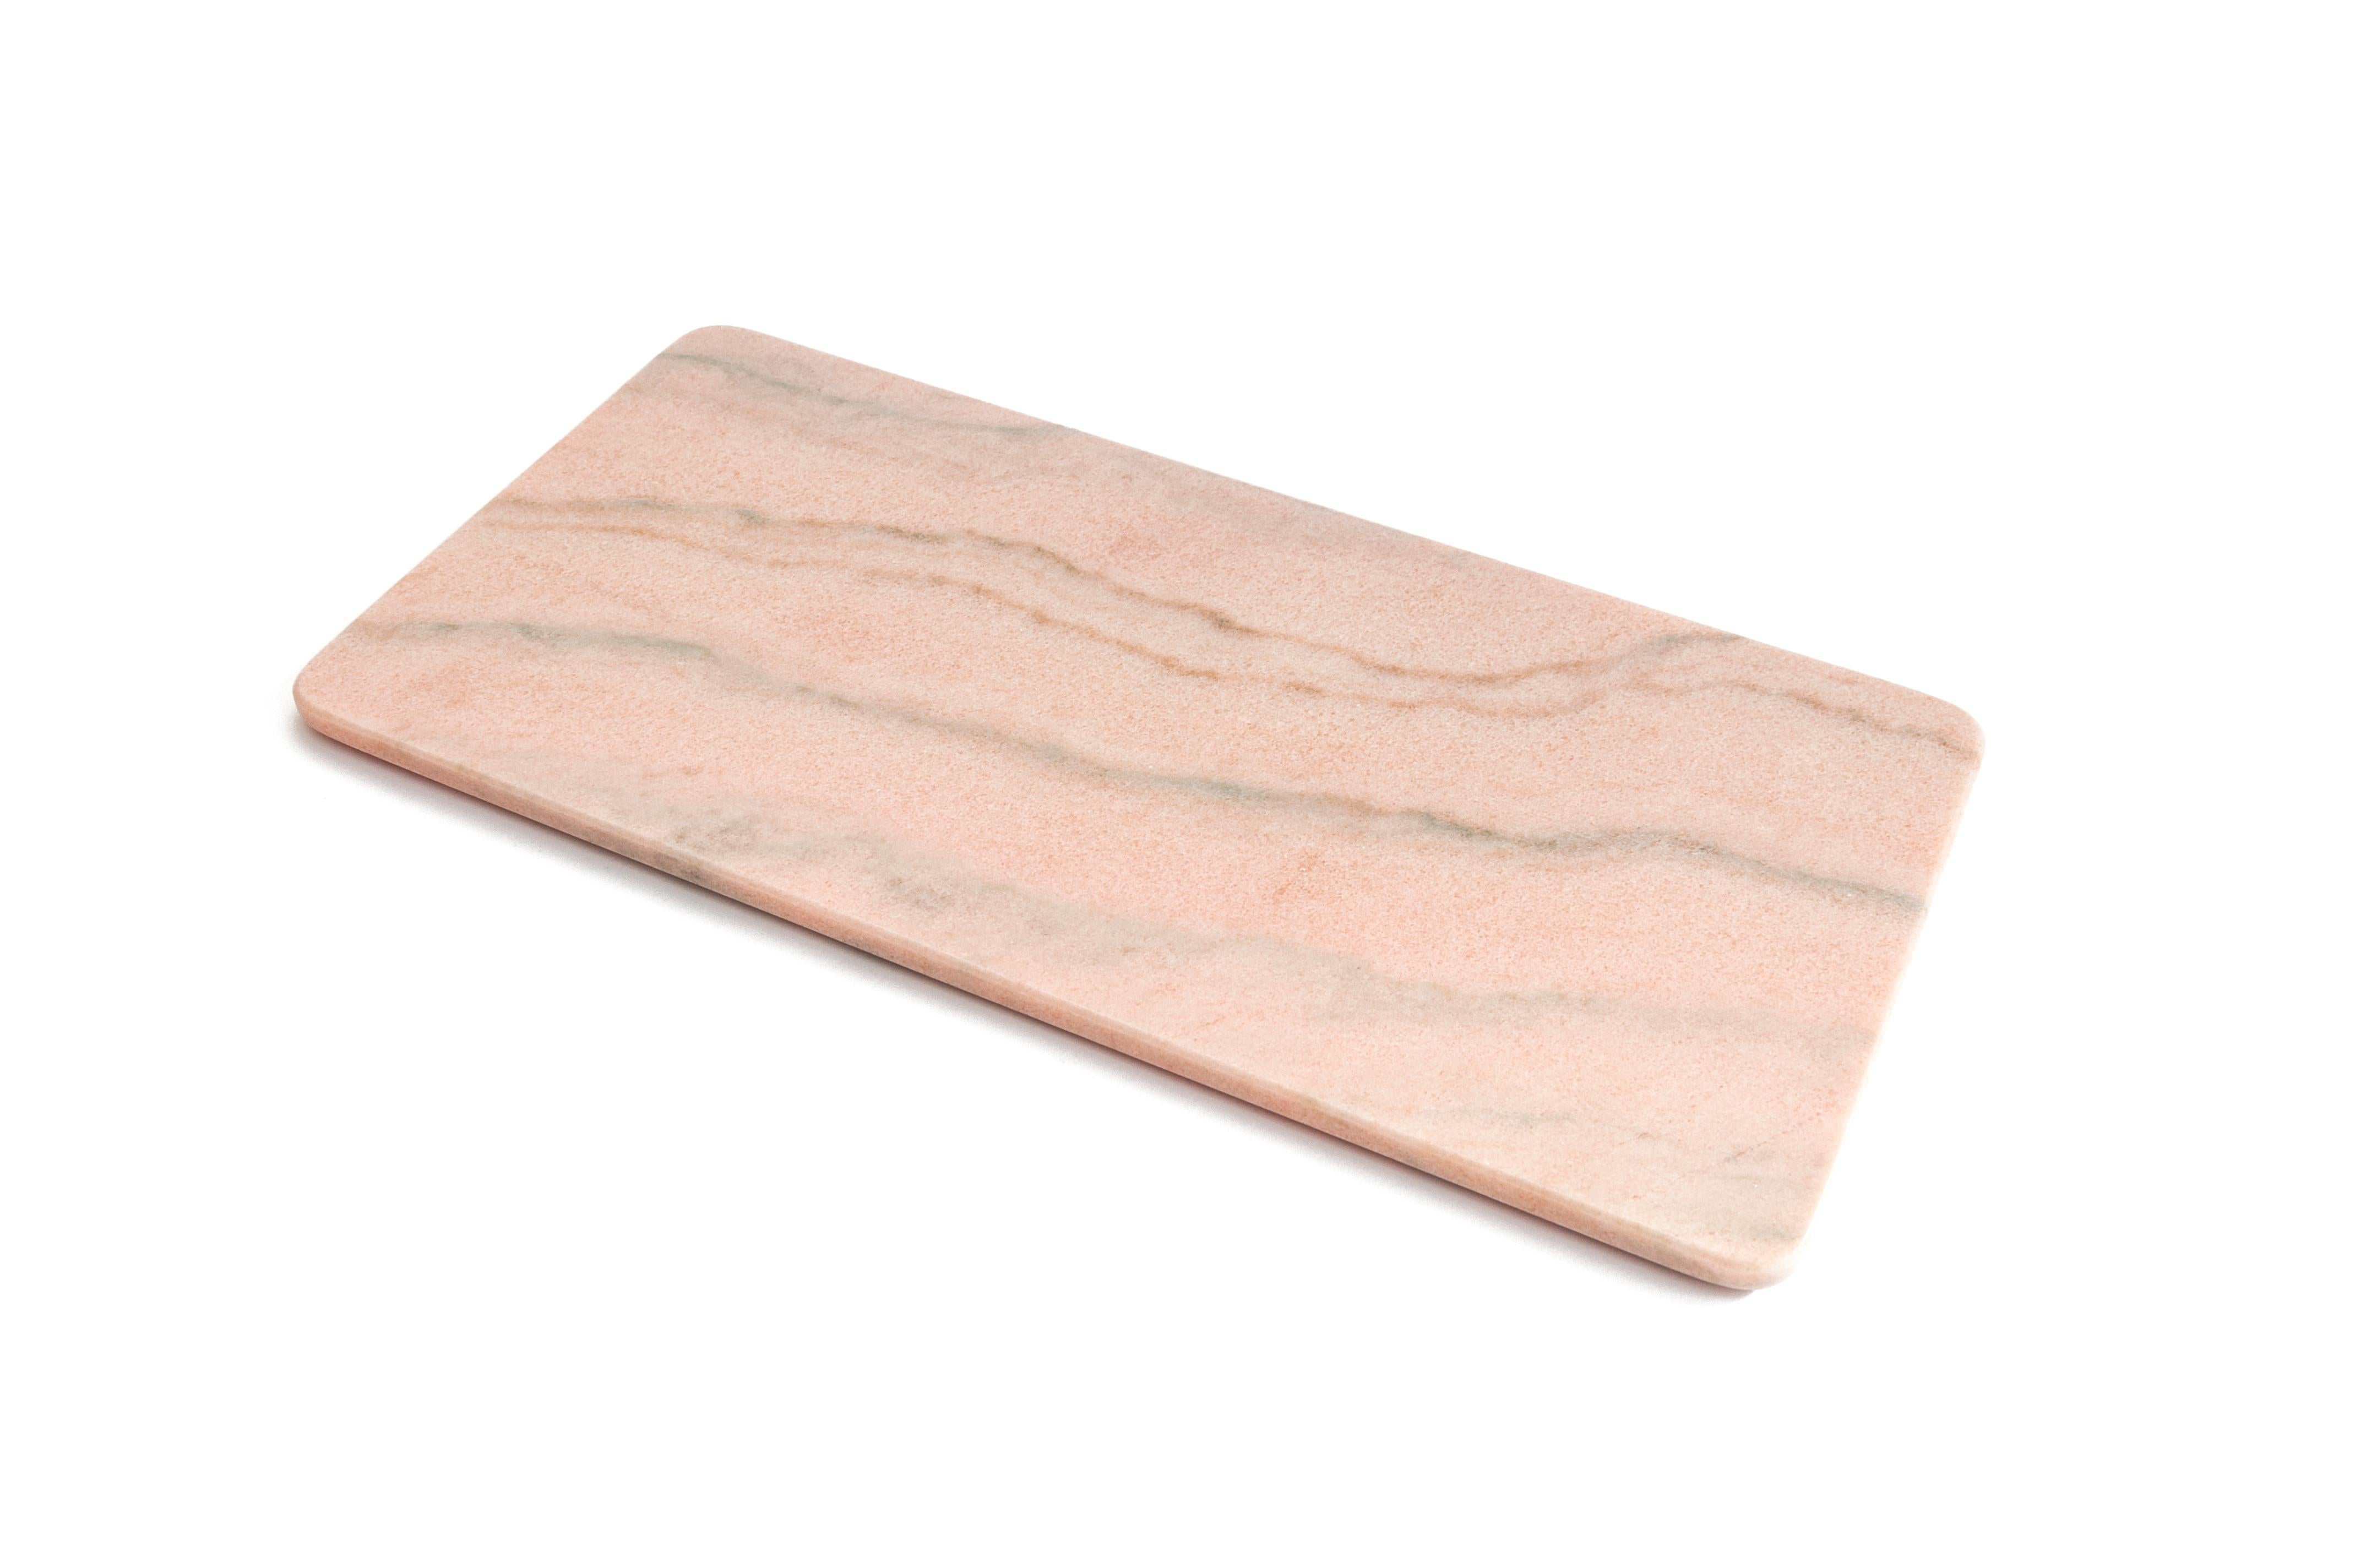 Italian Canapè / Cheese Plate in Pink Portugal Polished Marble